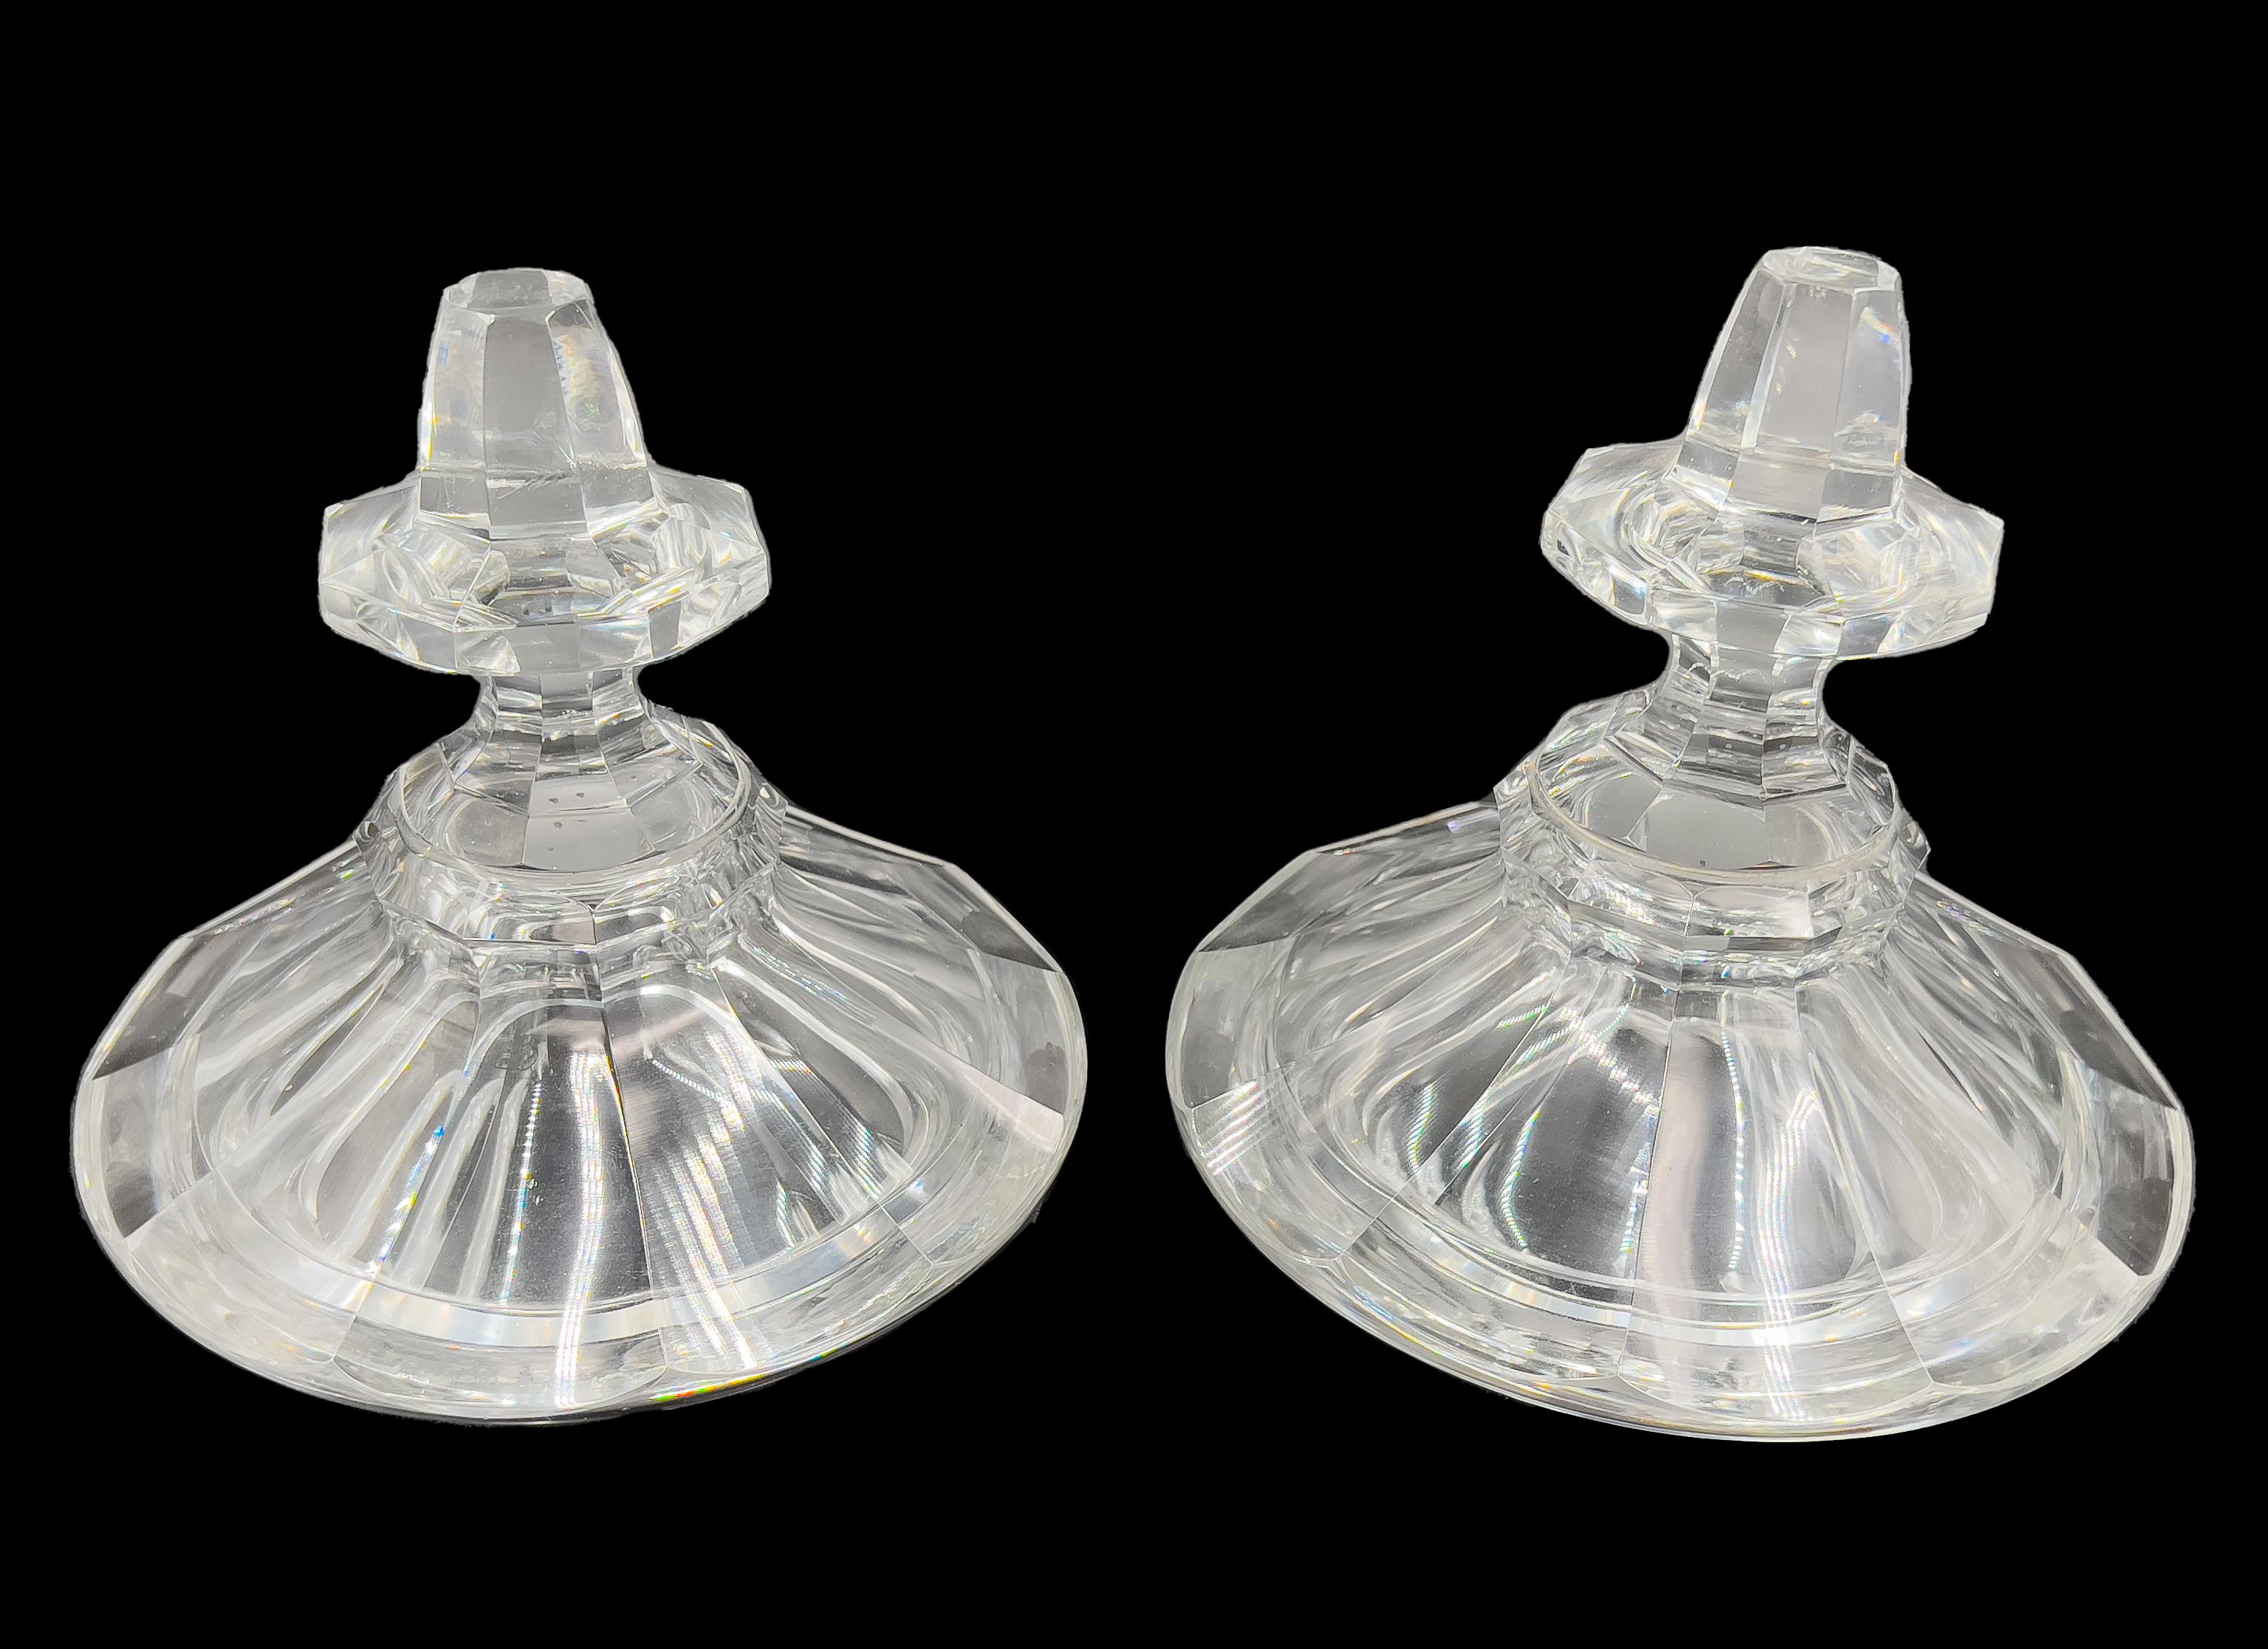 Fine Pair of Bohemian Cut and Etched Lidded Glass Vases, Late 19th/Early 20th  For Sale 6